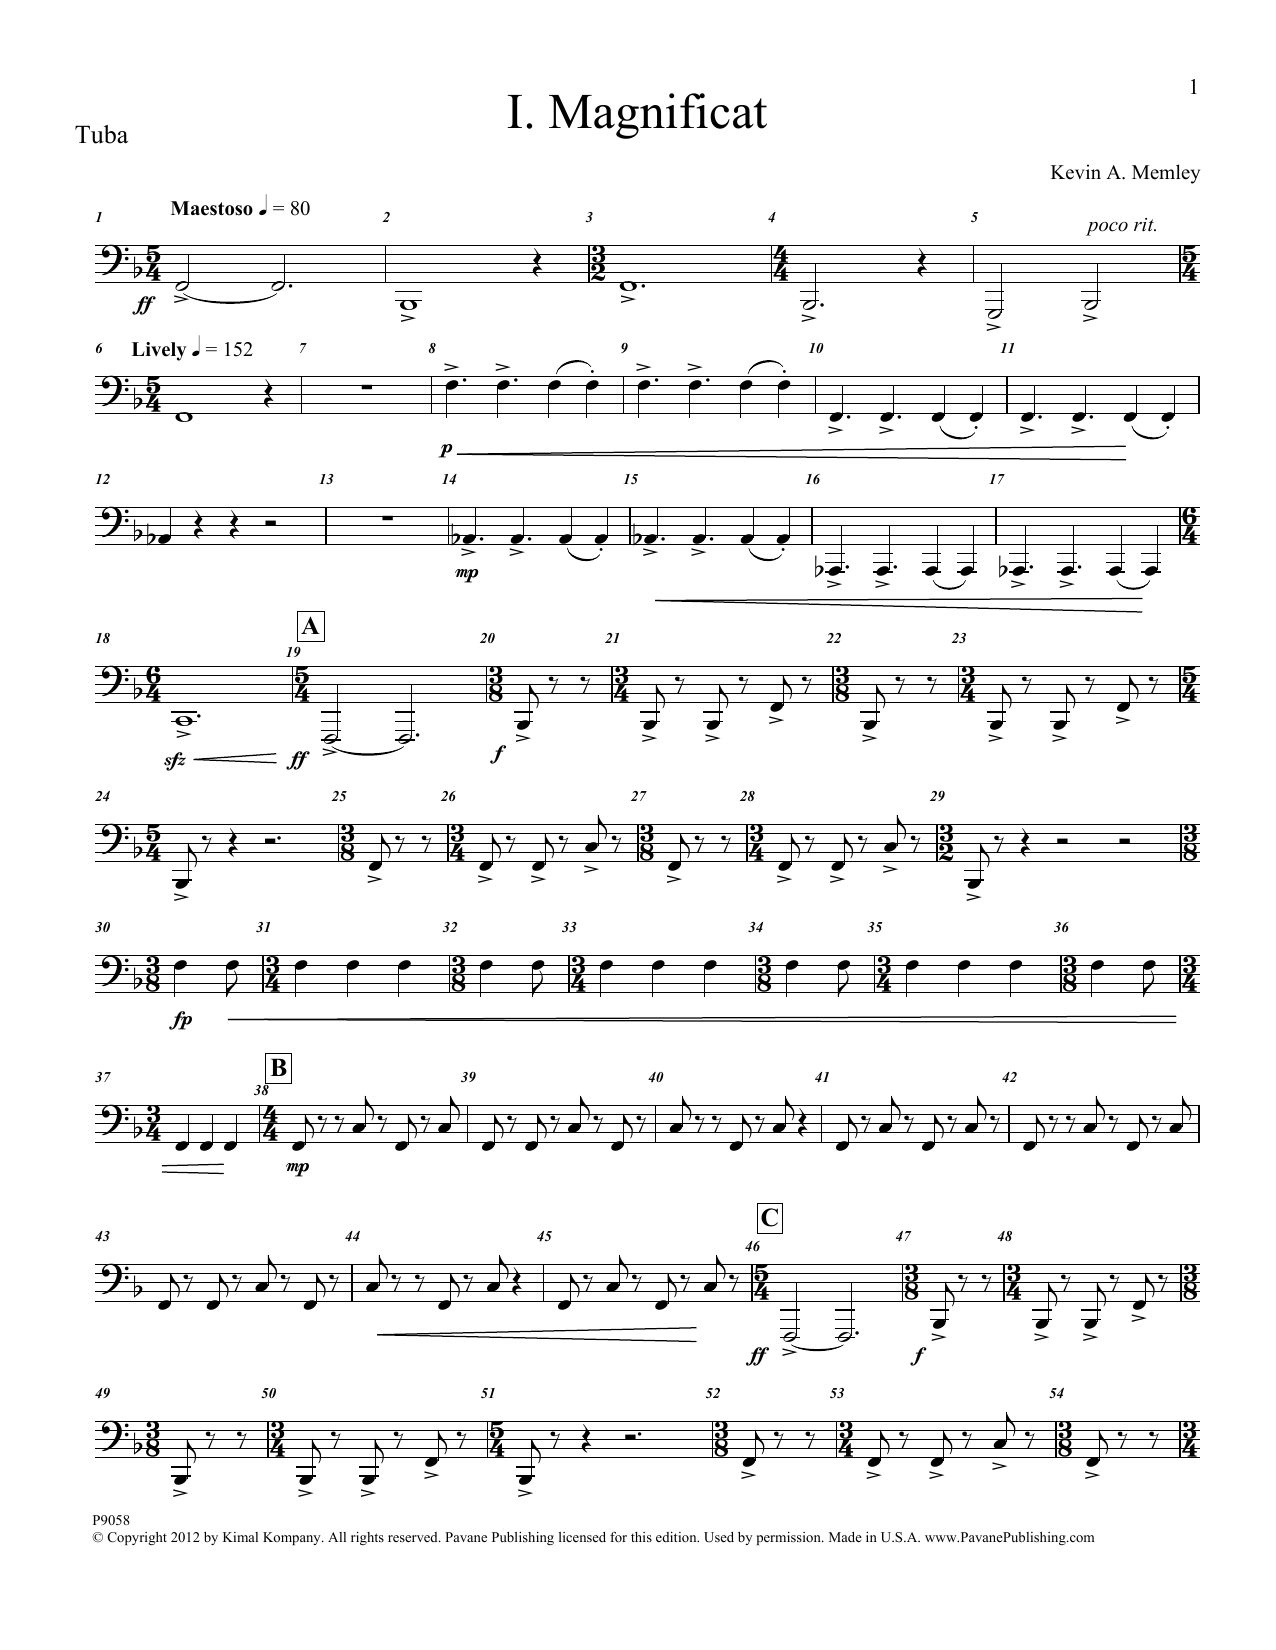 Download Kevin Memley Magnificat (Brass and Percussion) (Part Sheet Music